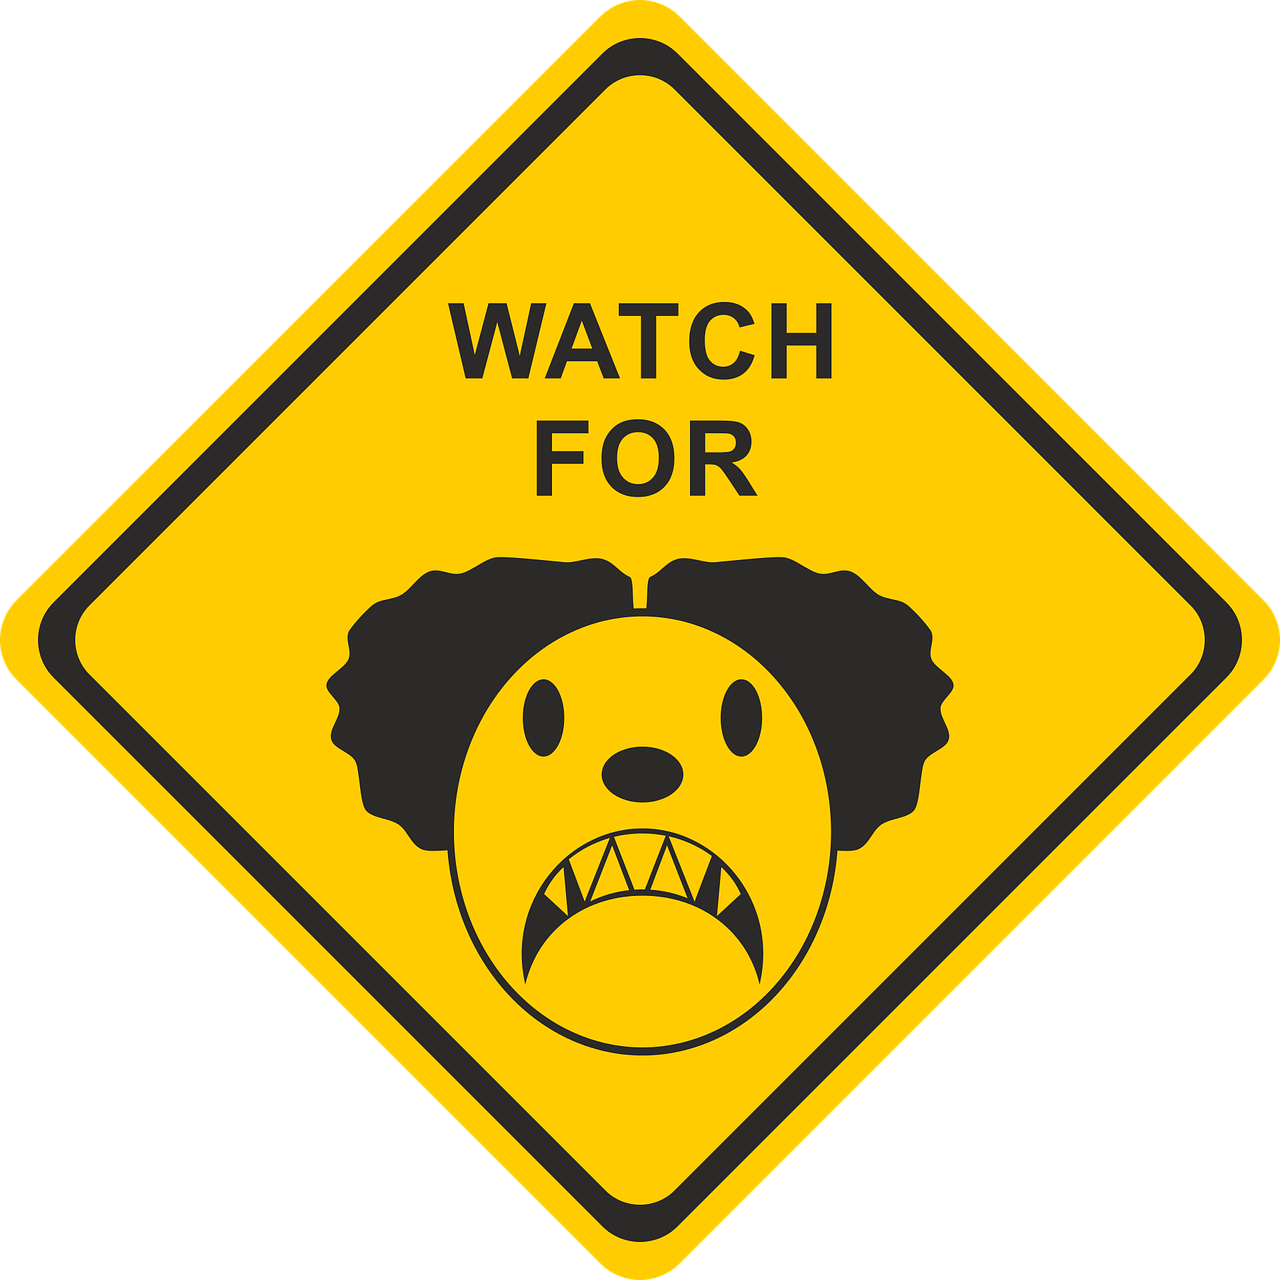 a yellow sign with a picture of a dog with a sad face, a cartoon, inspired by Edo Murtić, wearing a watch, eraserhead, parental advisory, control